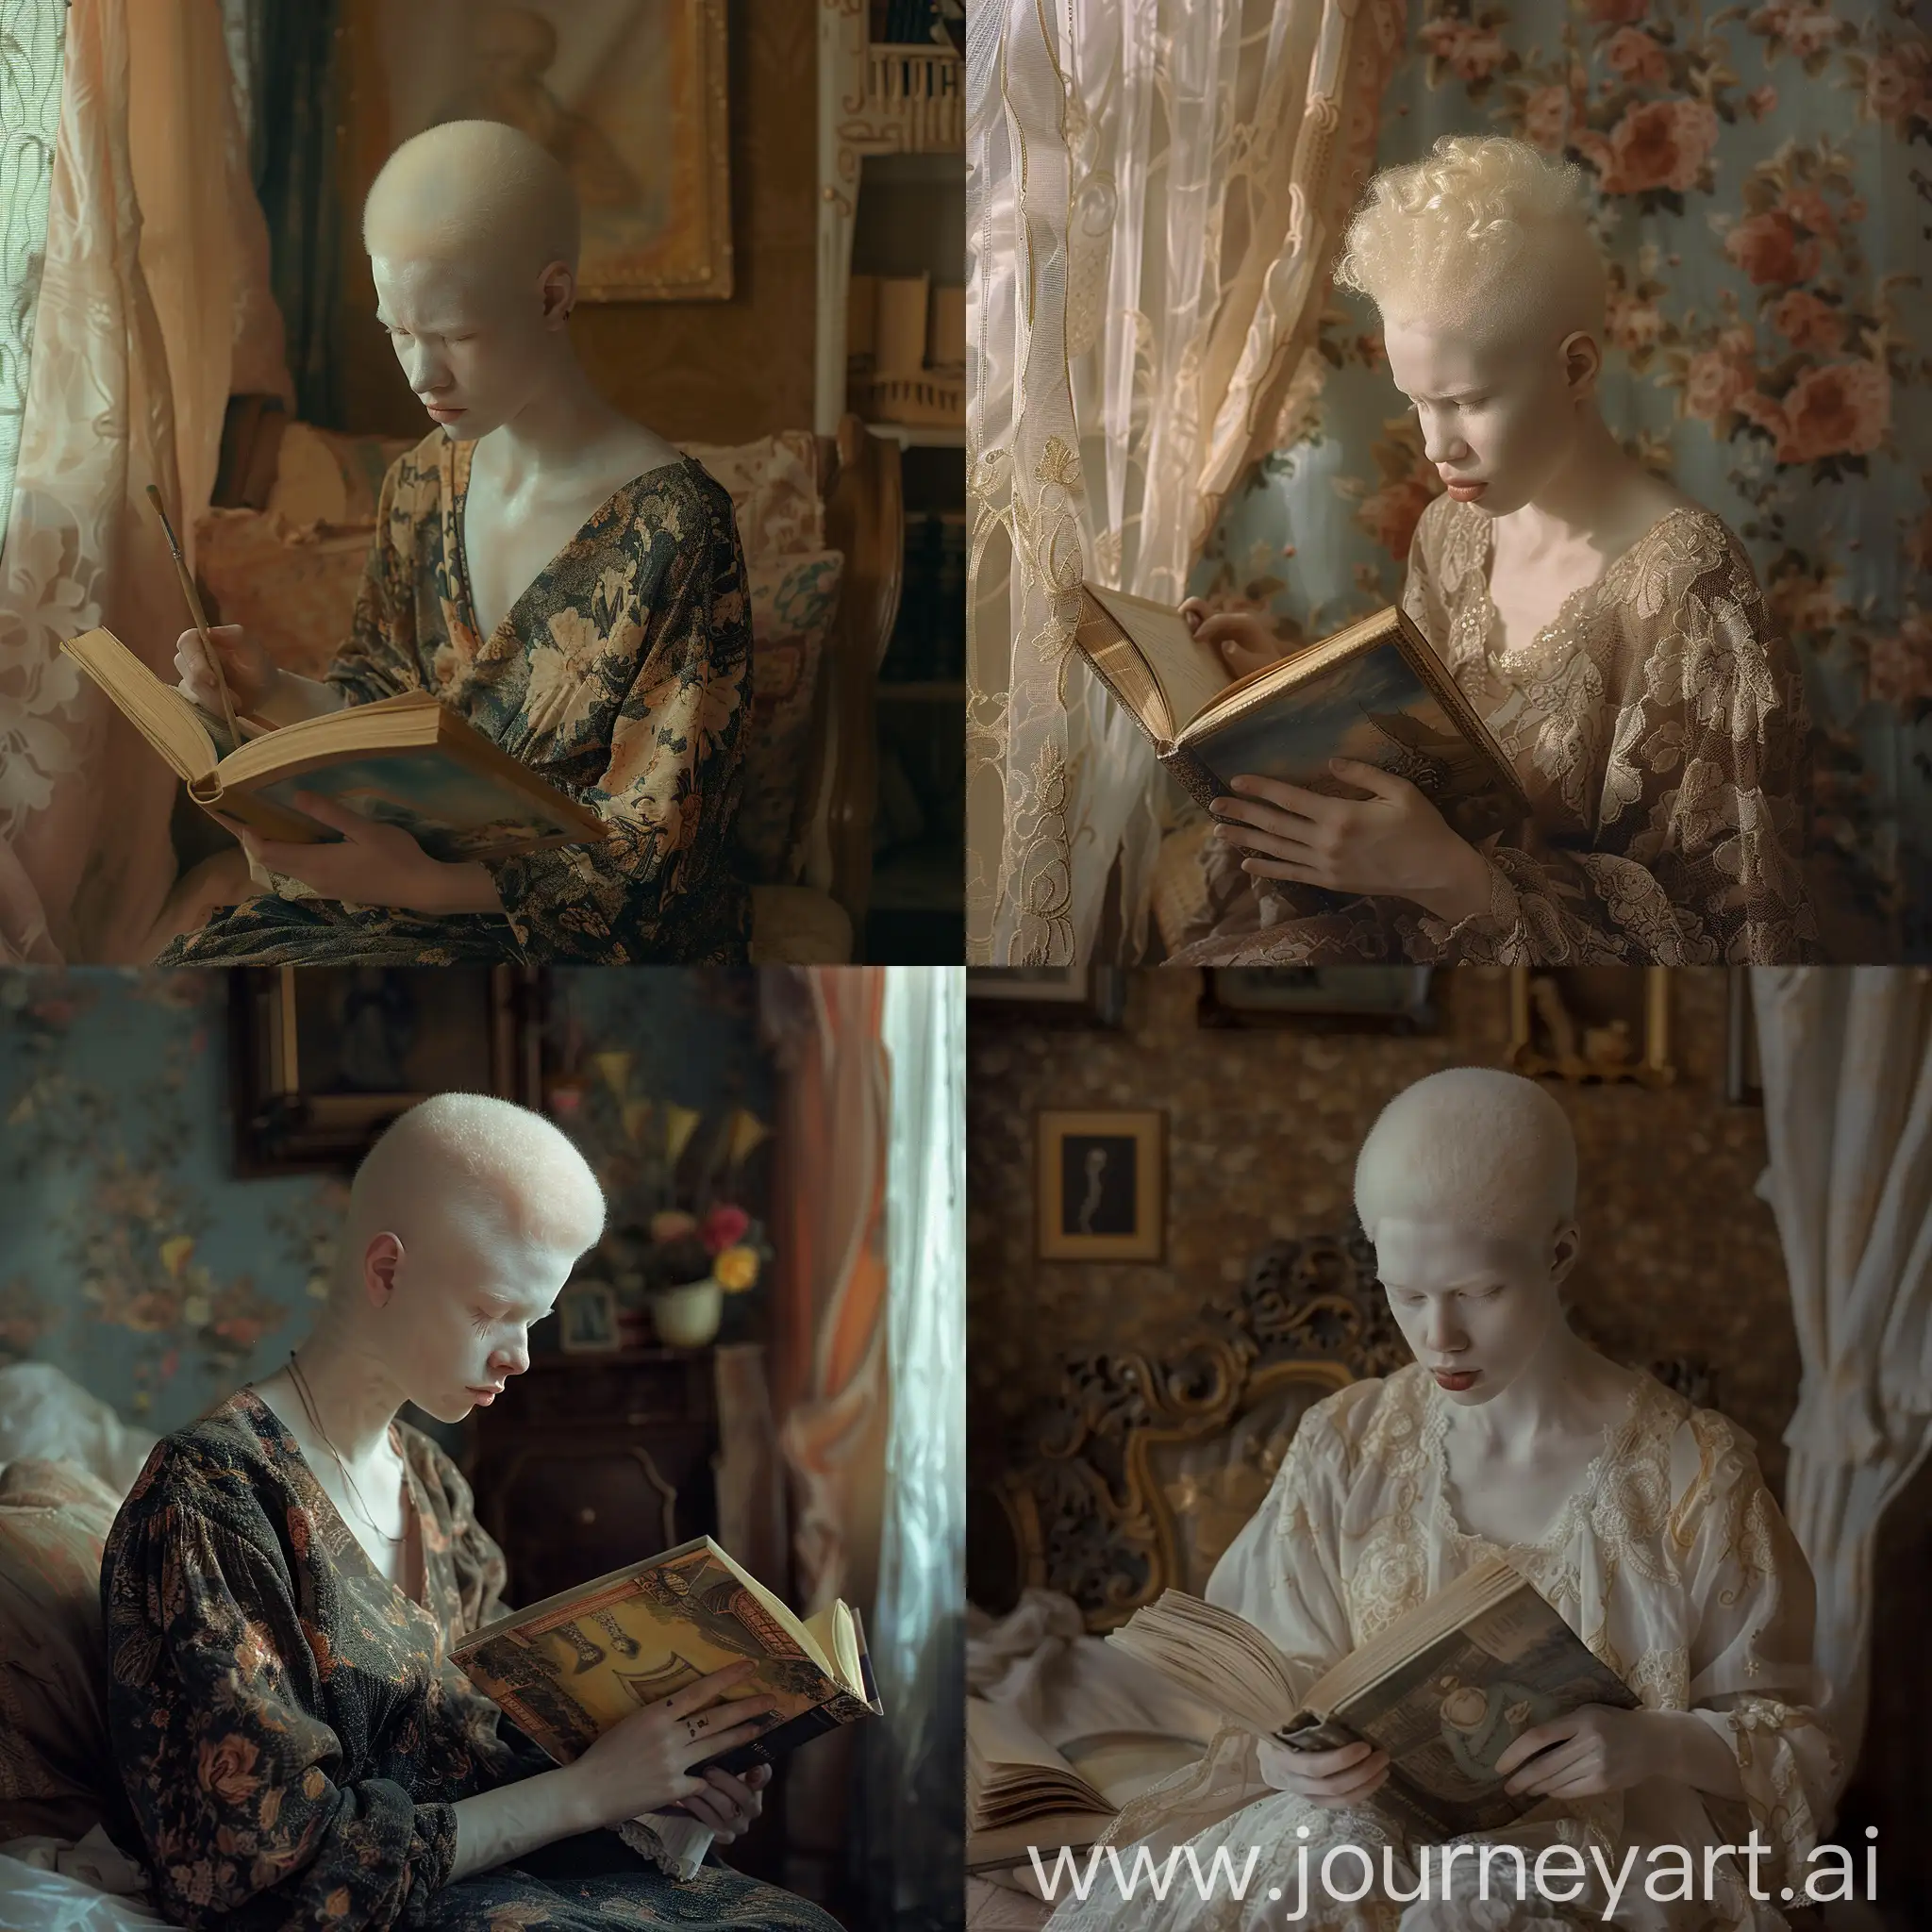 18-year-old albino woman, in a photographic shot of a romantic scene, sitting, reading a book and painting, in a sleepy room full of total silence, illuminated with warm light, with a look of faith, remembering who she was in the most difficult moments. difficult.